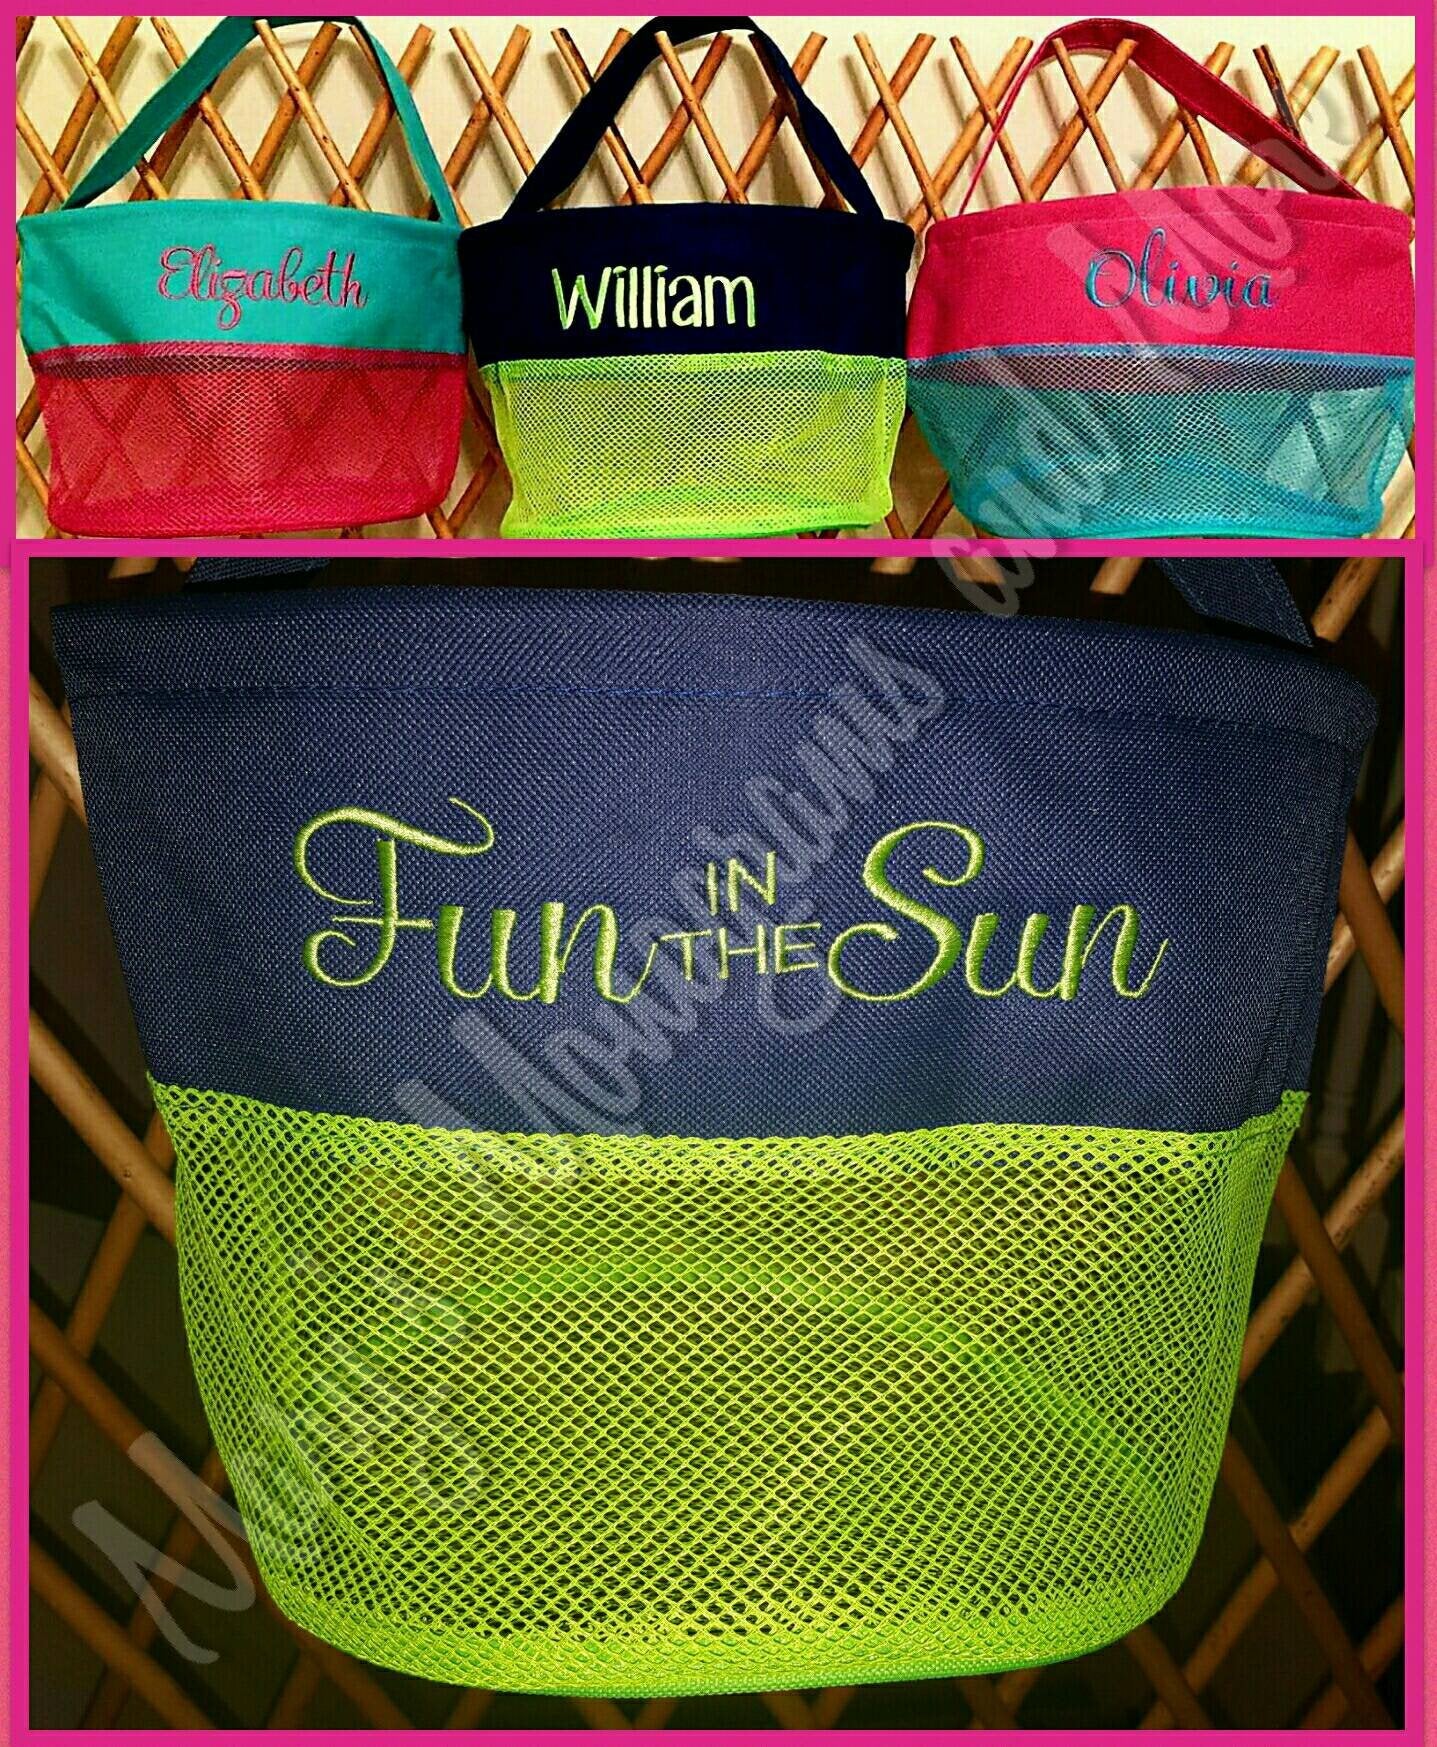 FREE SHIPPING - Embroidery Personalized Mesh Seashell Bucket - Monogrammed Shell Bag - Bath Toy Basket - Embroidered Pool Toy Carrier